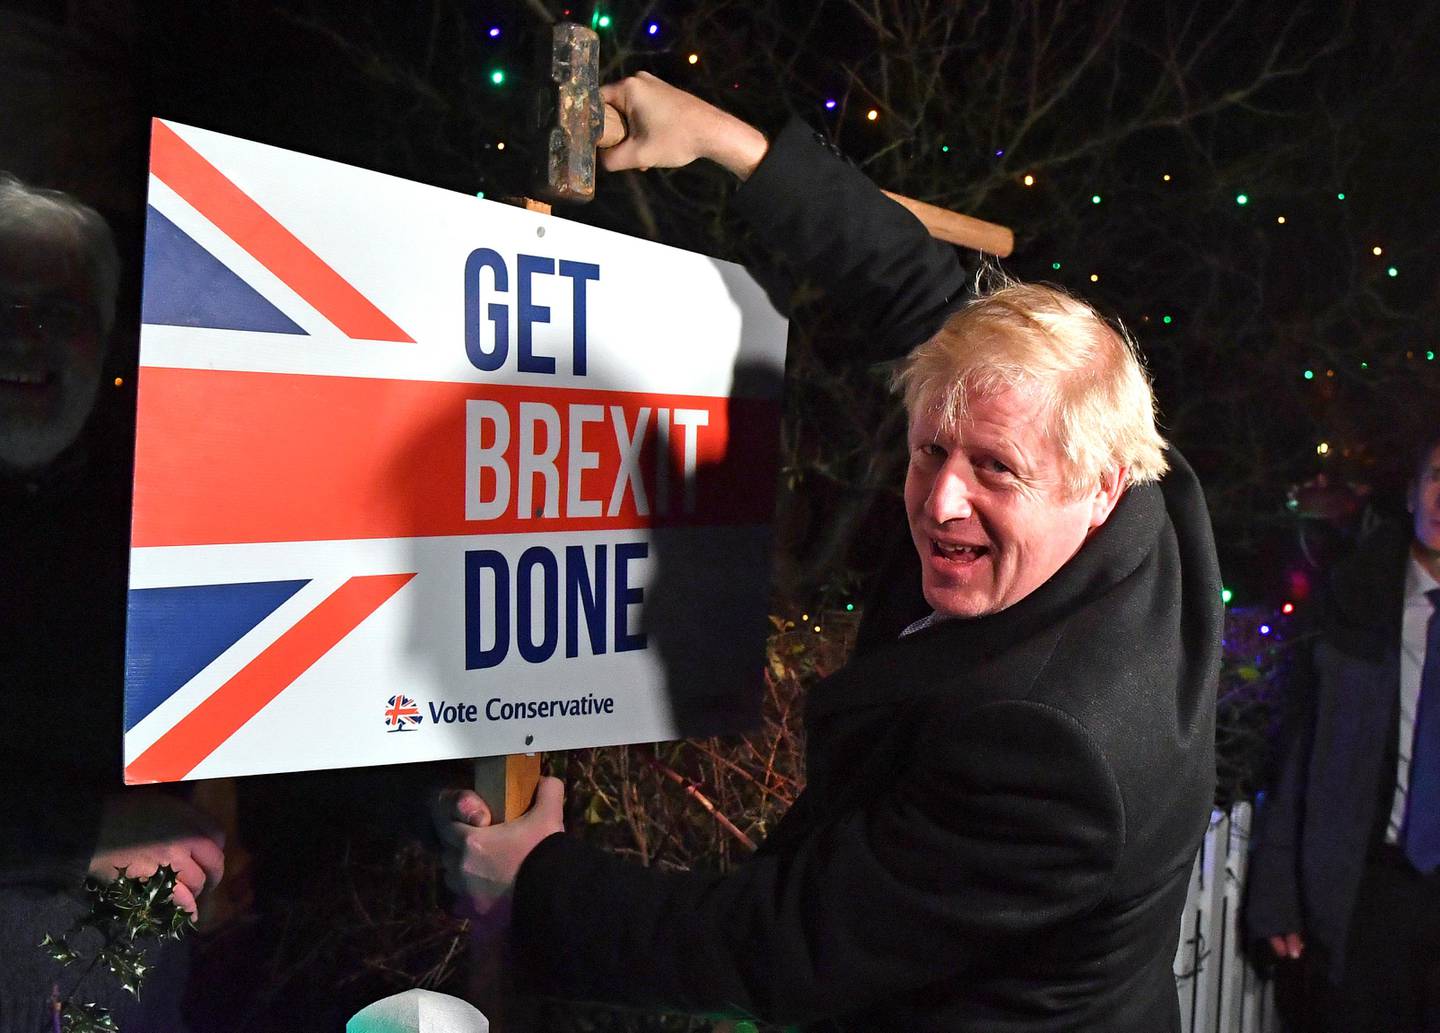 FILE -- In this Wednesday, Dec. 11, 2019 file photo, Britain's Prime Minister and Conservative party leader Boris Johnson poses as he hammers a "Get Brexit Done" sign into the garden of a supporter, in Benfleet, England. Britain and the European Union have struck a provisional free-trade agreement that should avert New Year chaos for cross-border traders and bring a measure of certainty for businesses after years of Brexit turmoil.  (Ben Stansall/Pool via AP, File)